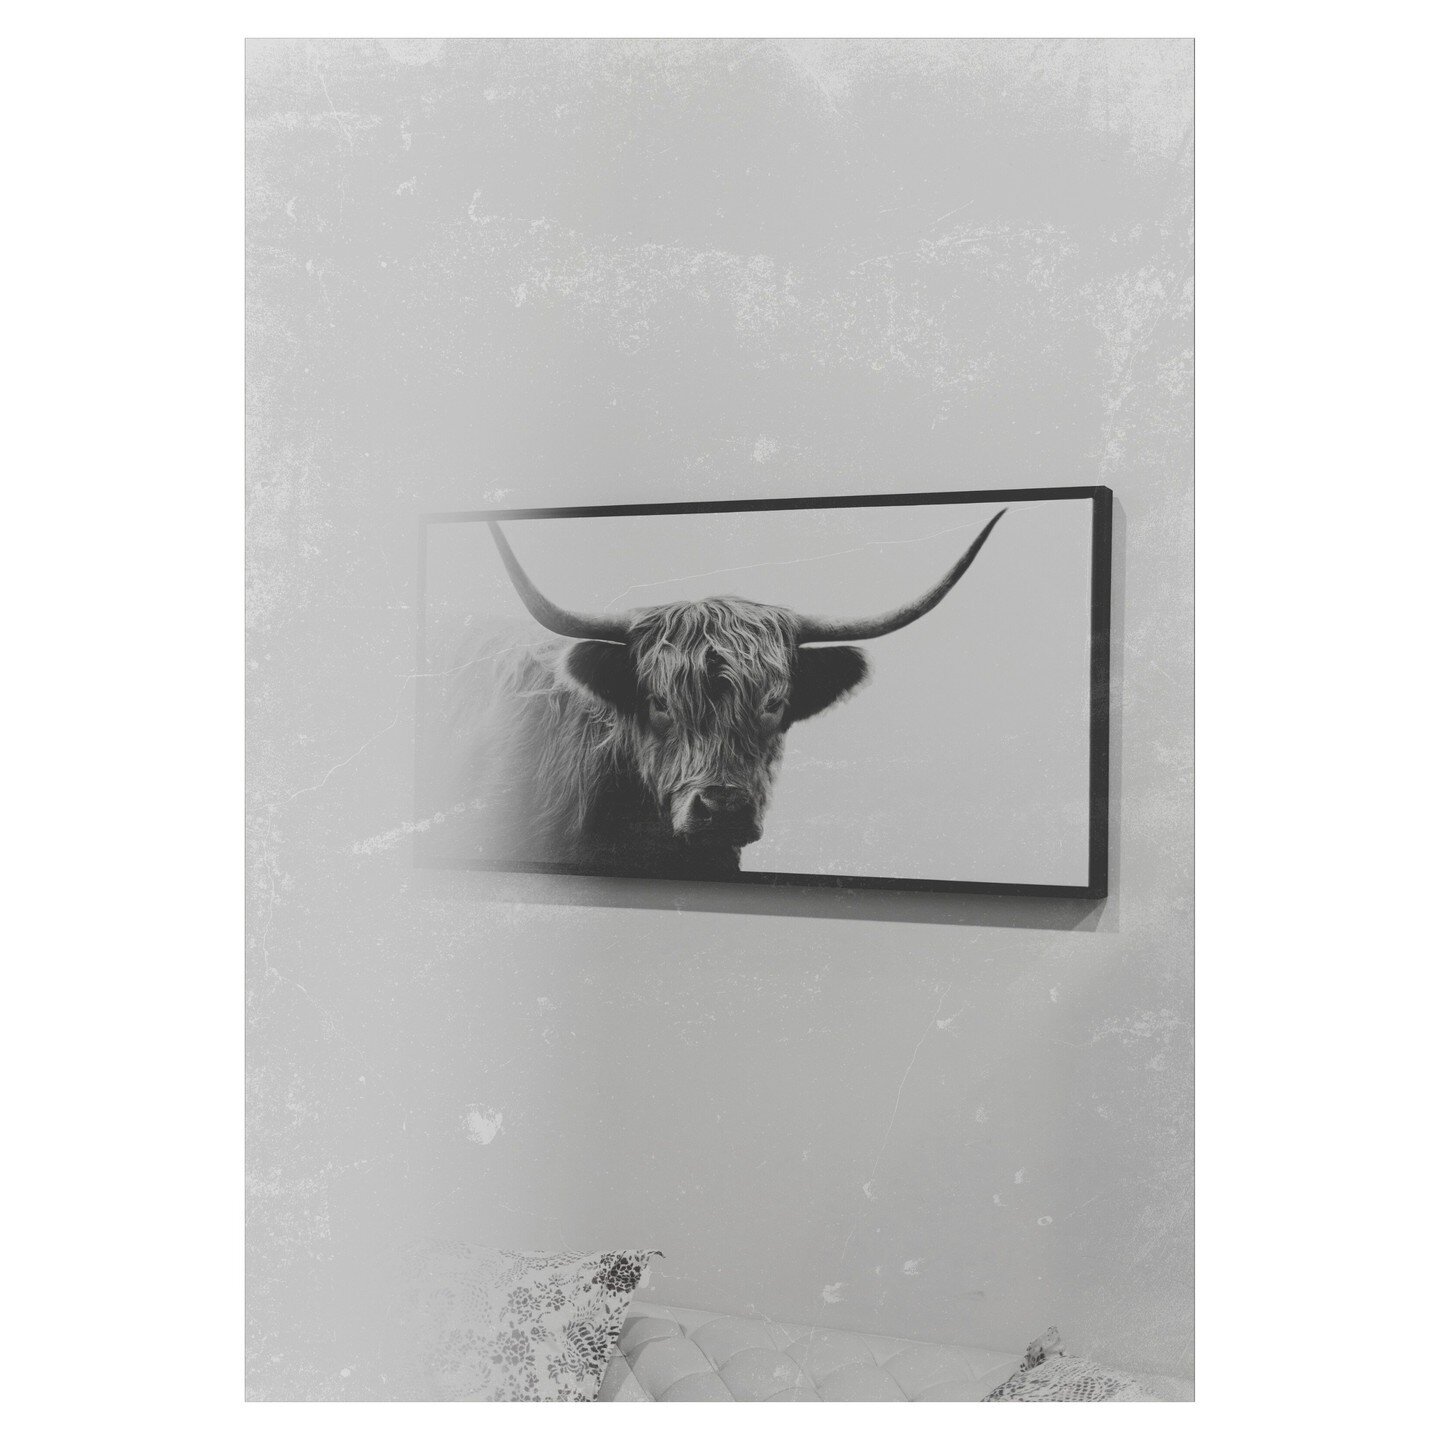 Because every rad coffee shop needs a cow on the wall.🤟